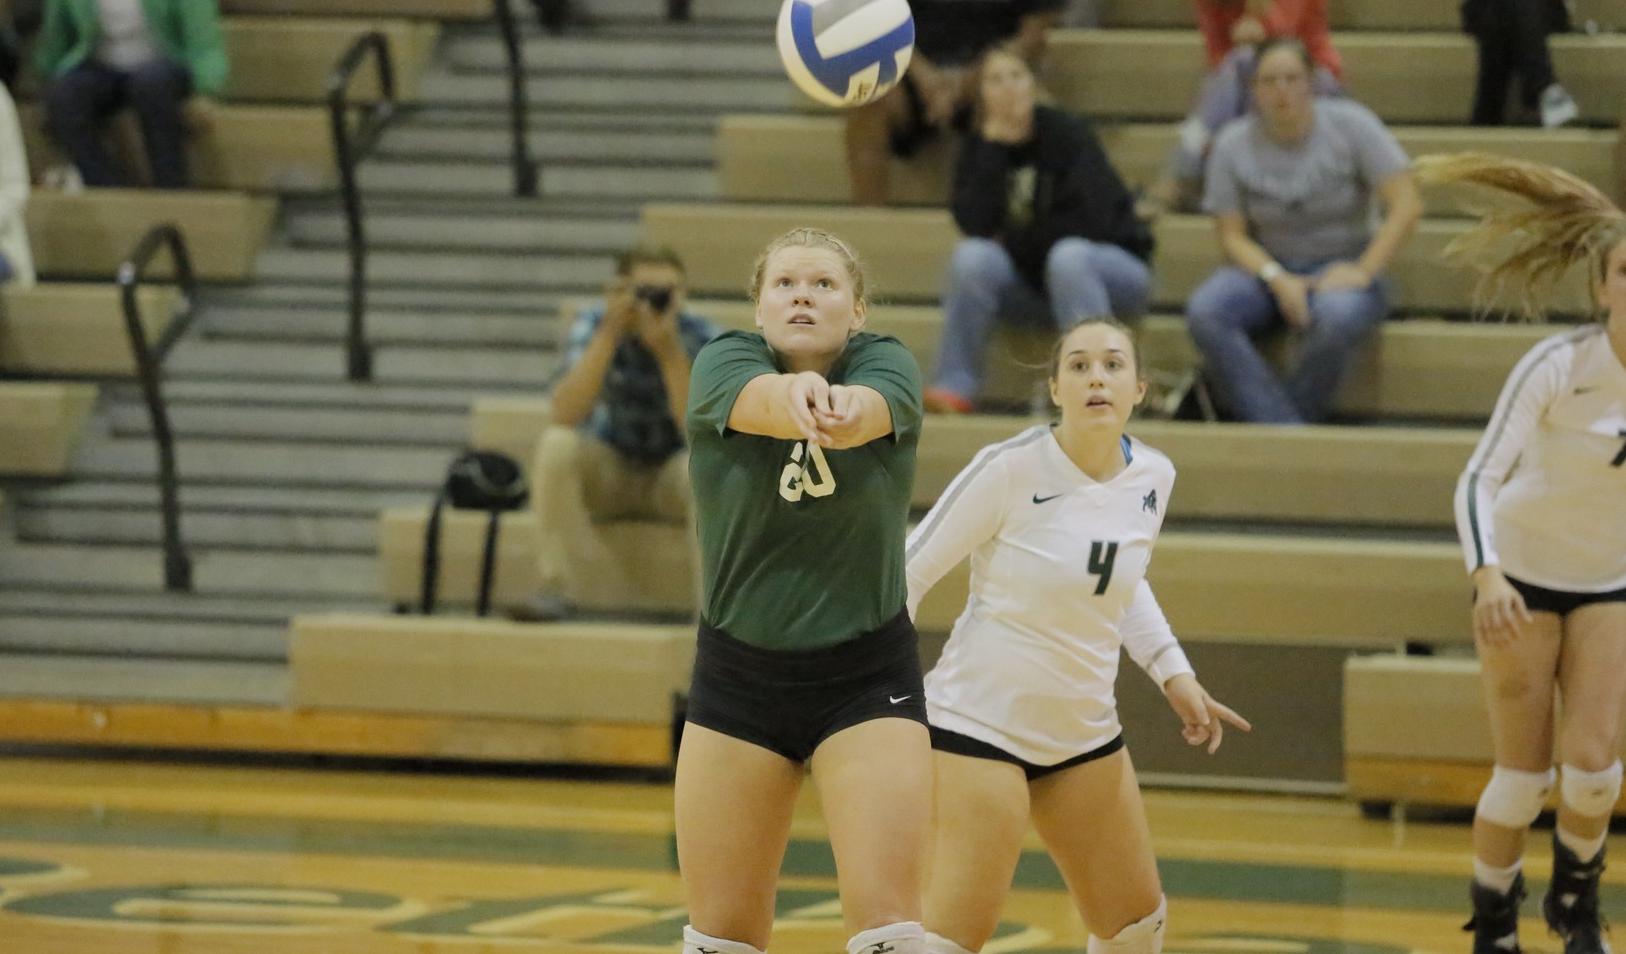 Volleyball rallies past W&J, 3-2